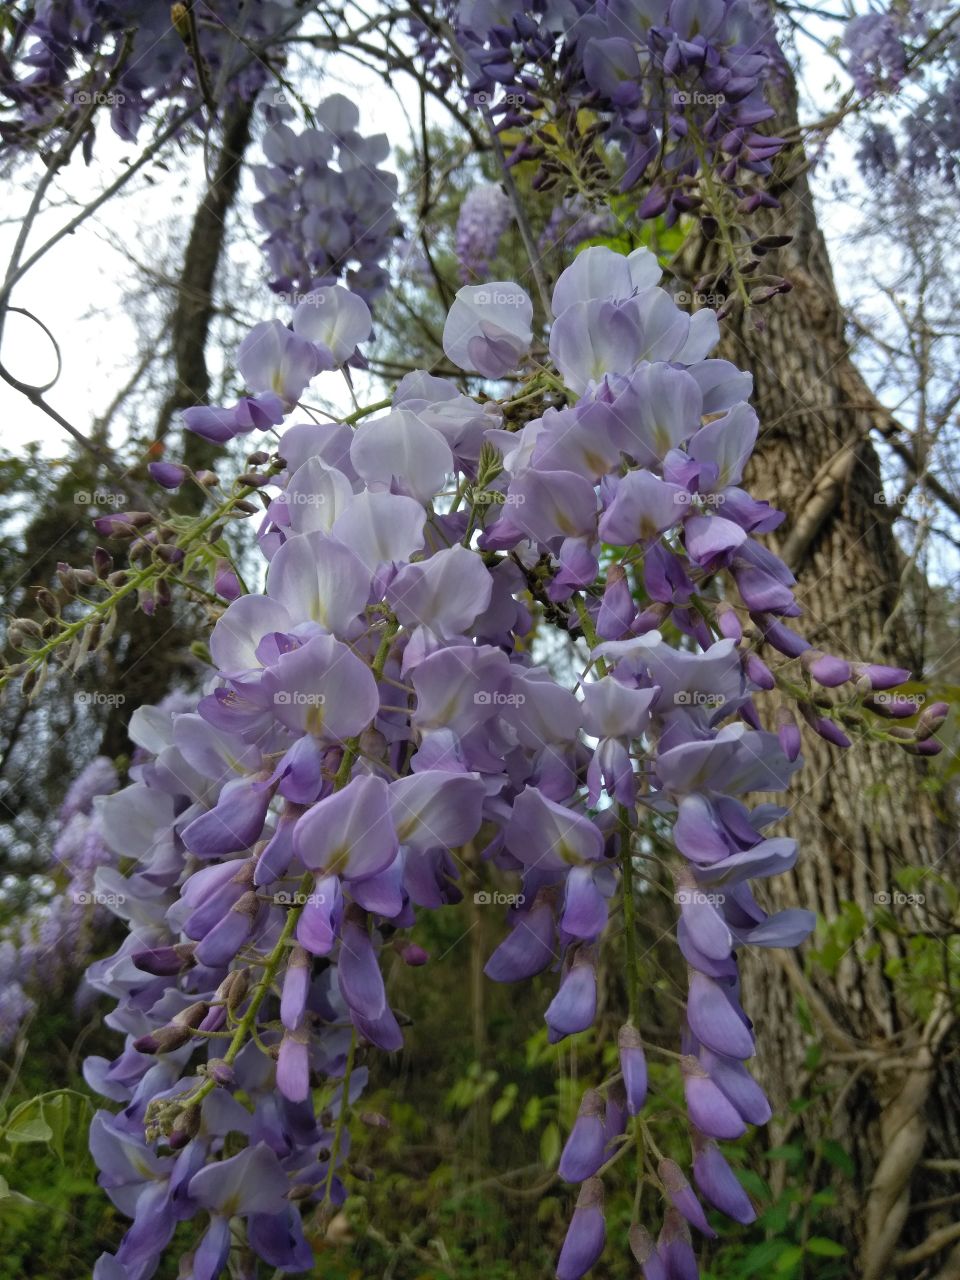 Brand-new wisteria spring blooms vining off of a pine tree in the foothills of North Carolina.